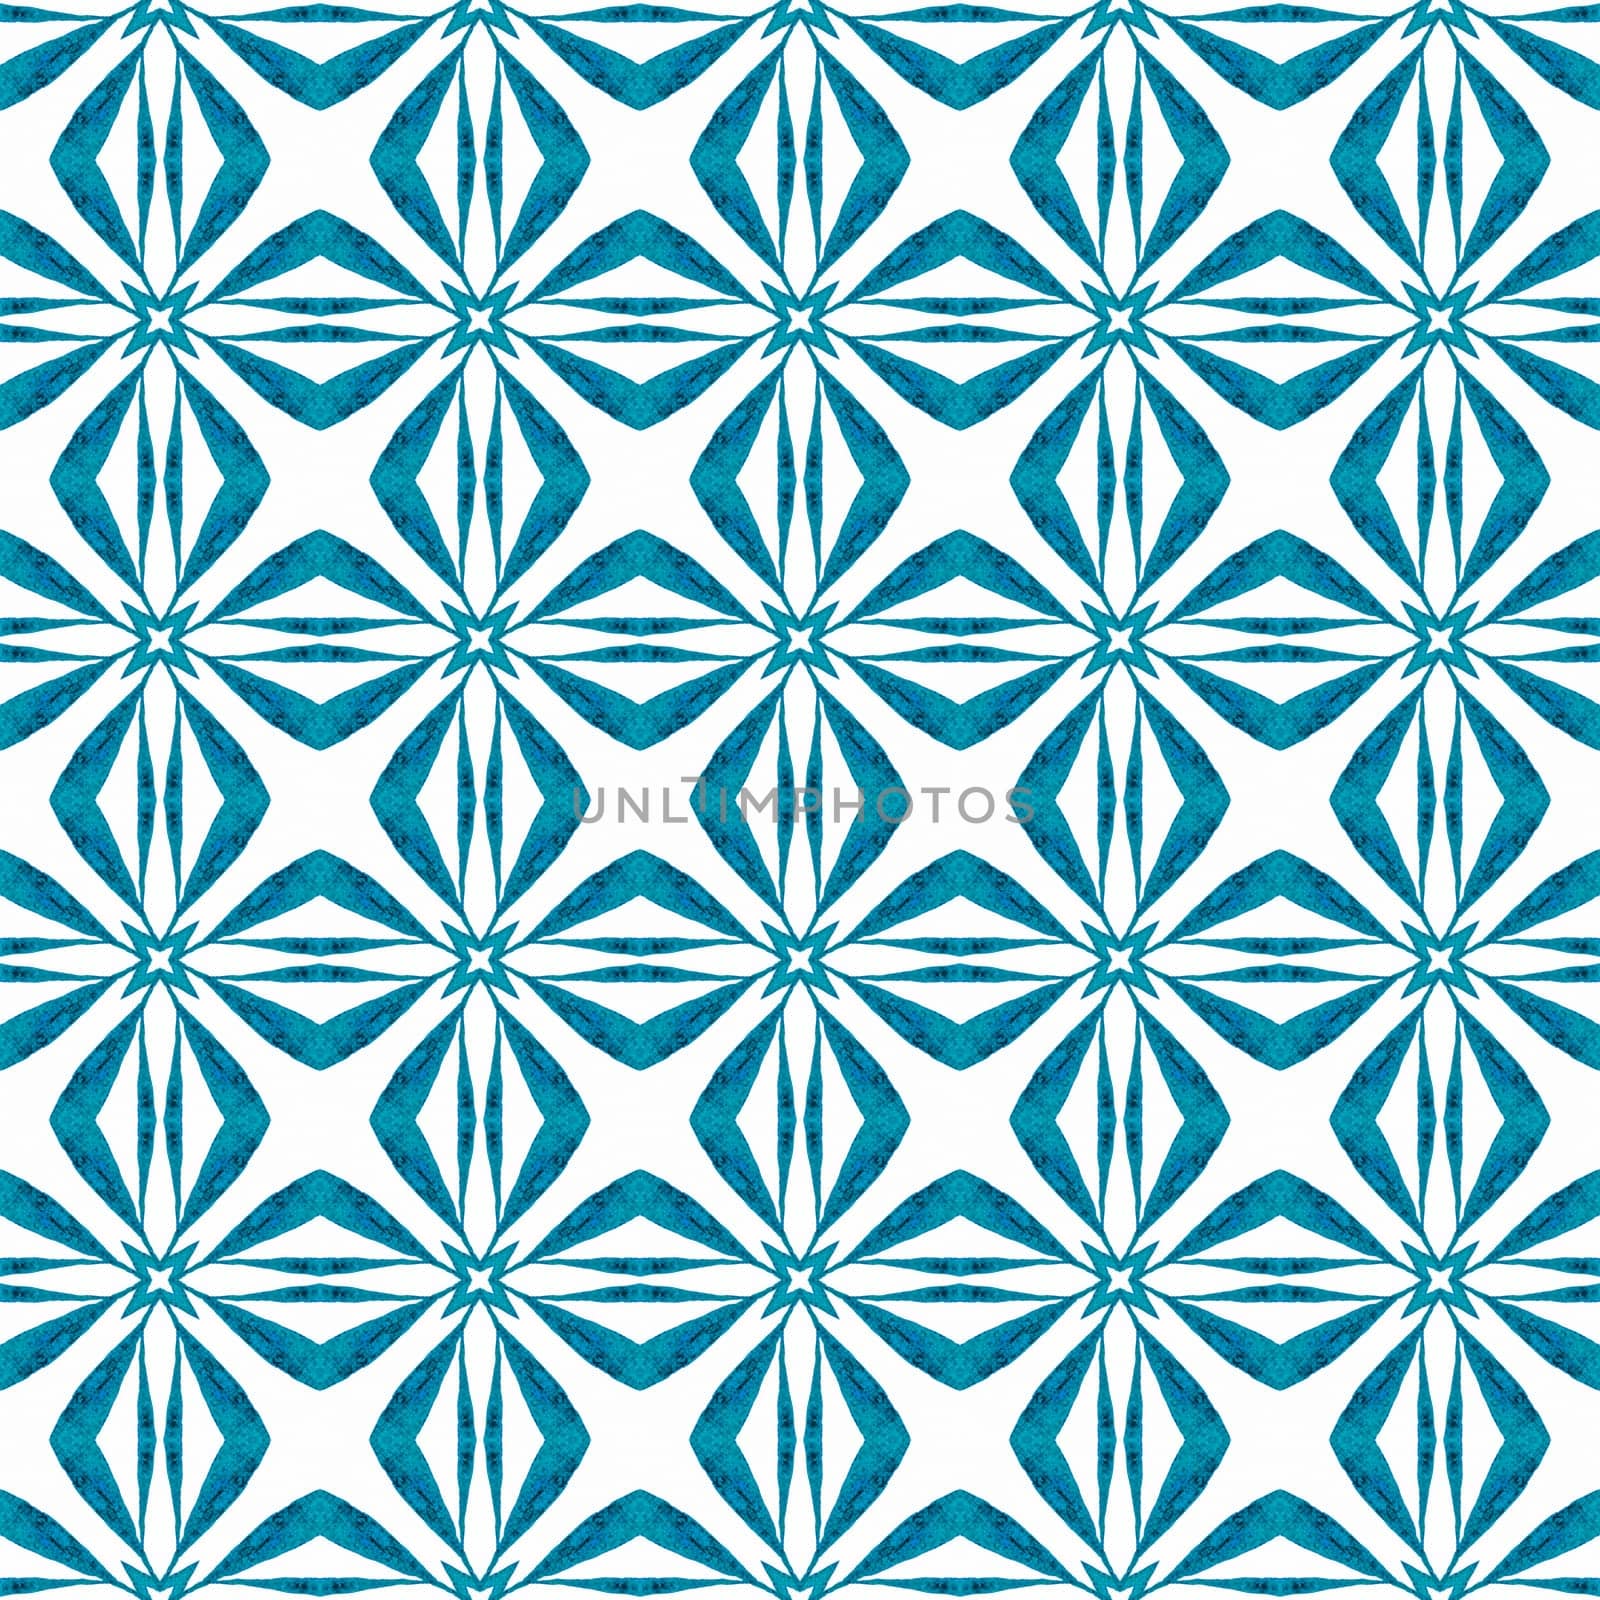 Watercolor ikat repeating tile border. Blue classic boho chic summer design. Textile ready appealing print, swimwear fabric, wallpaper, wrapping. Ikat repeating swimwear design.